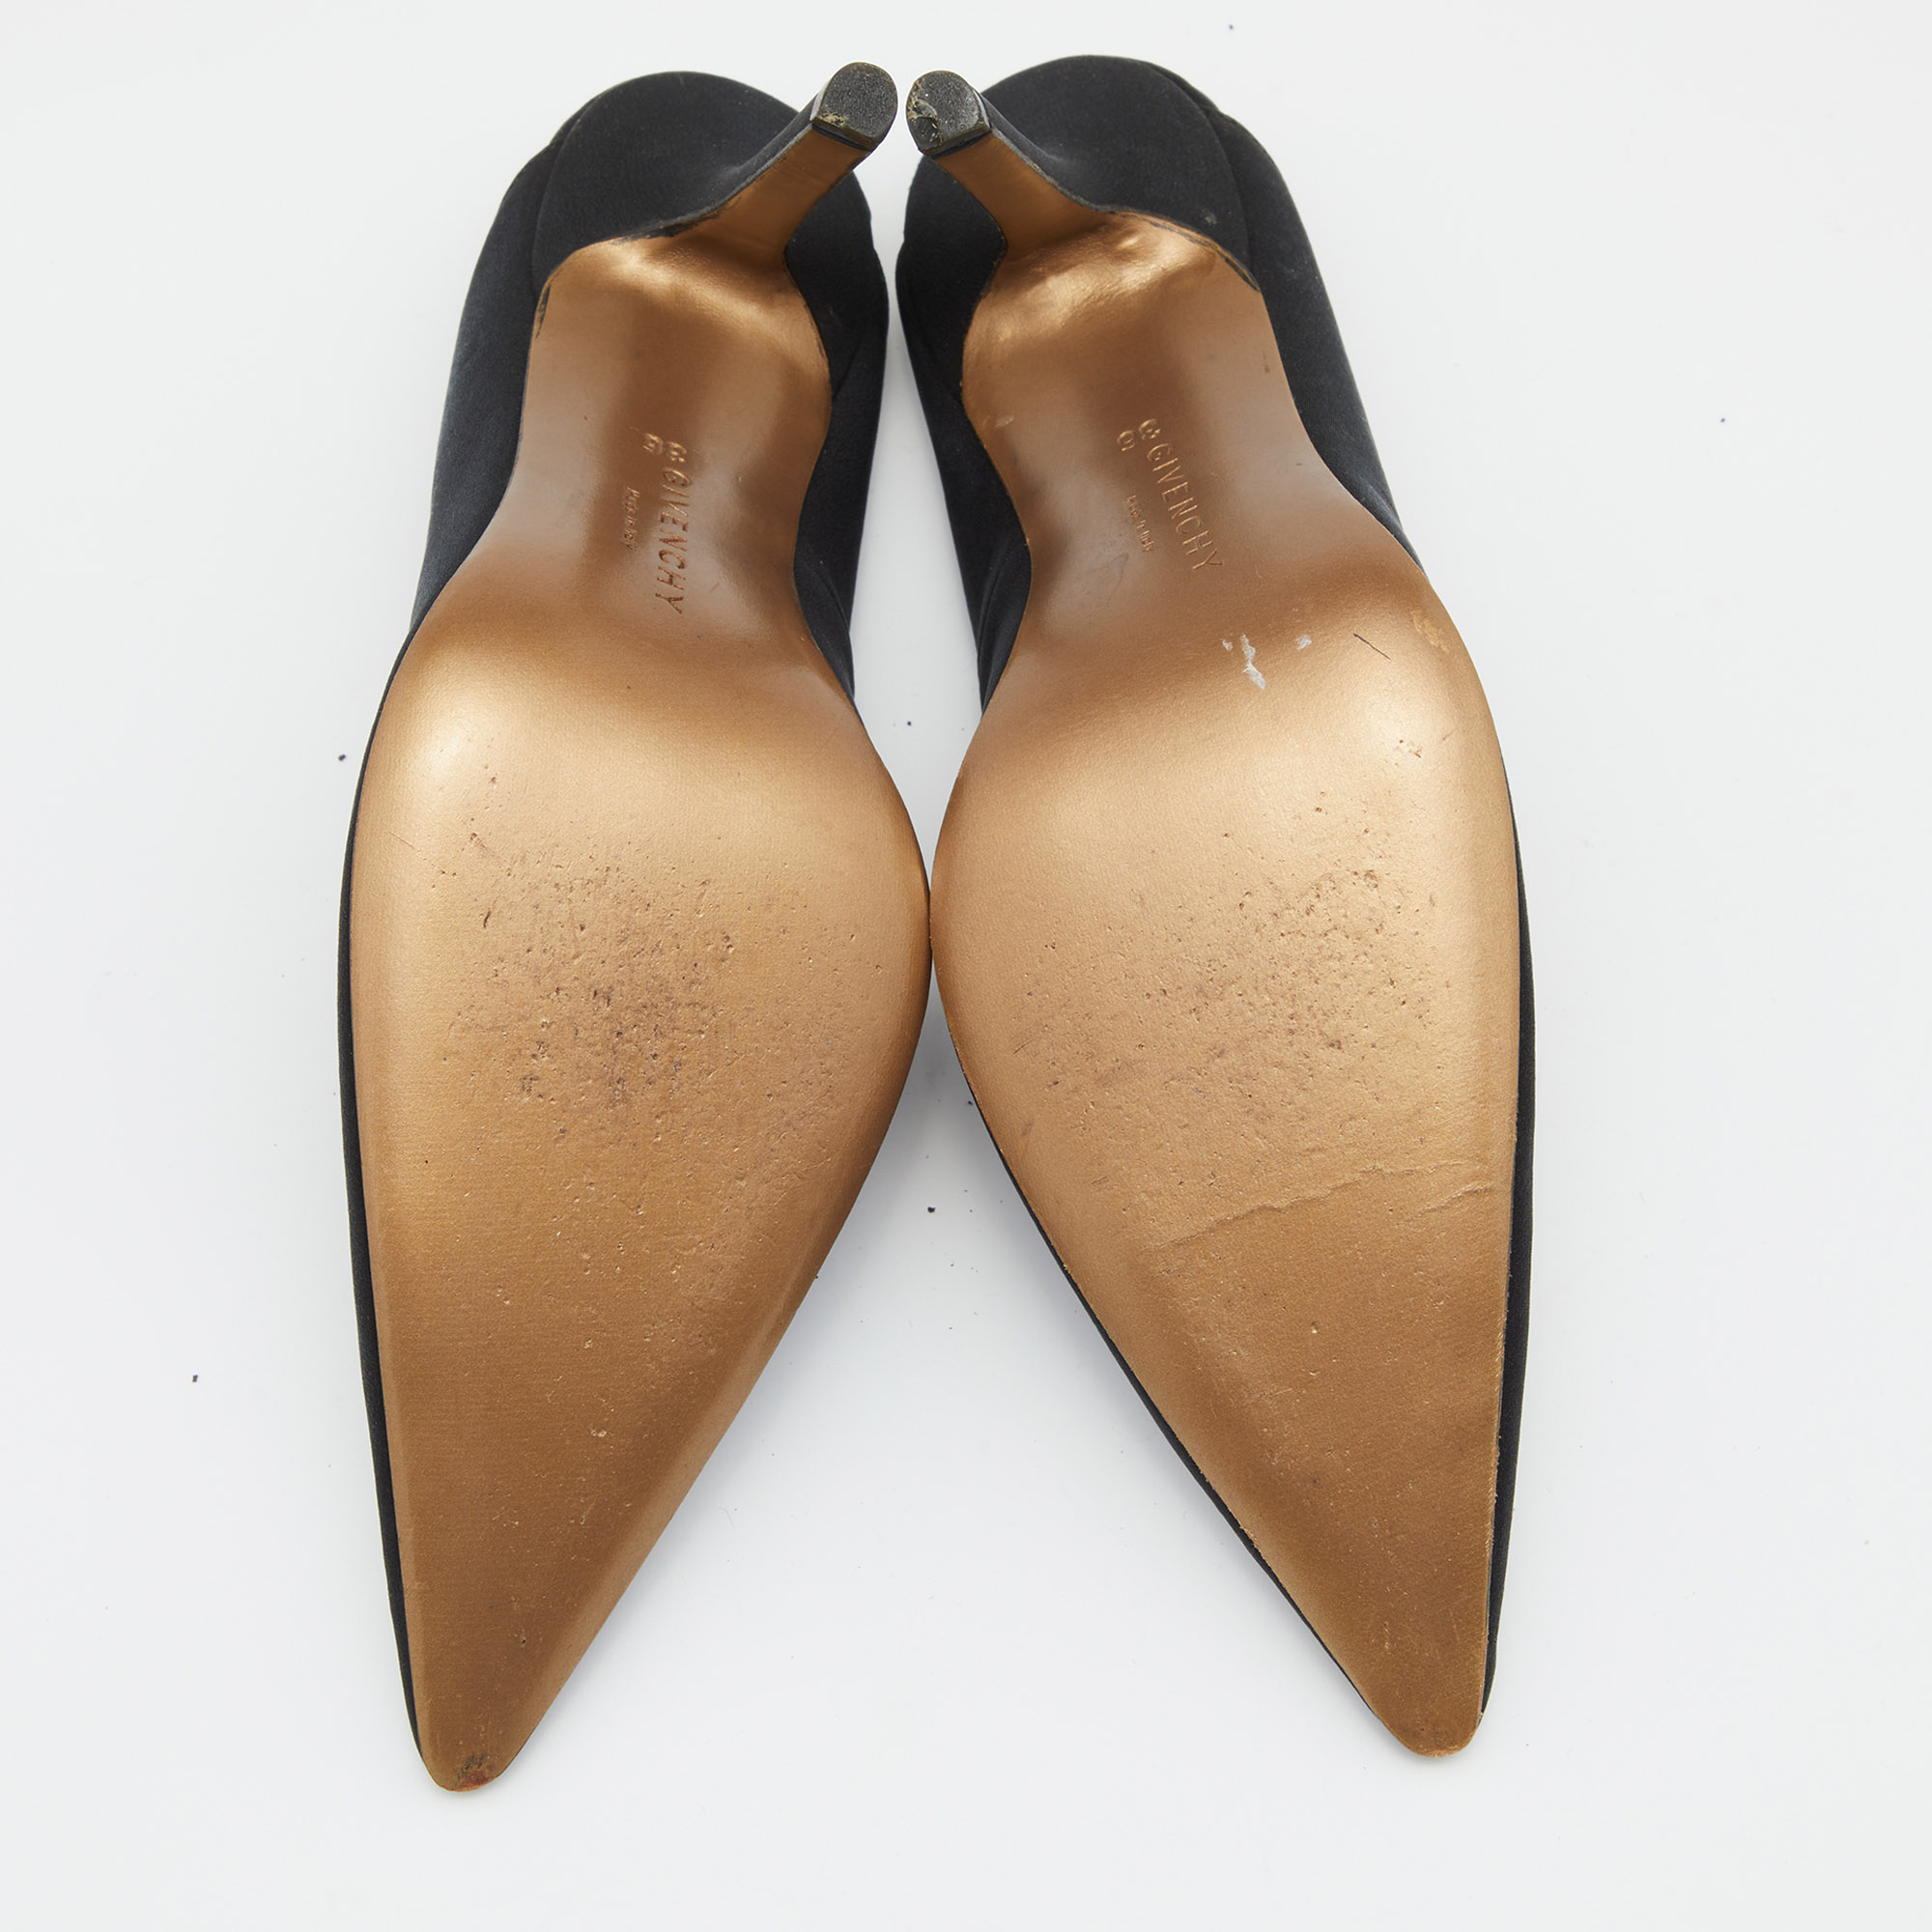 Givenchy Black Fabric Pointed Toe Slingback Pumps Size 36